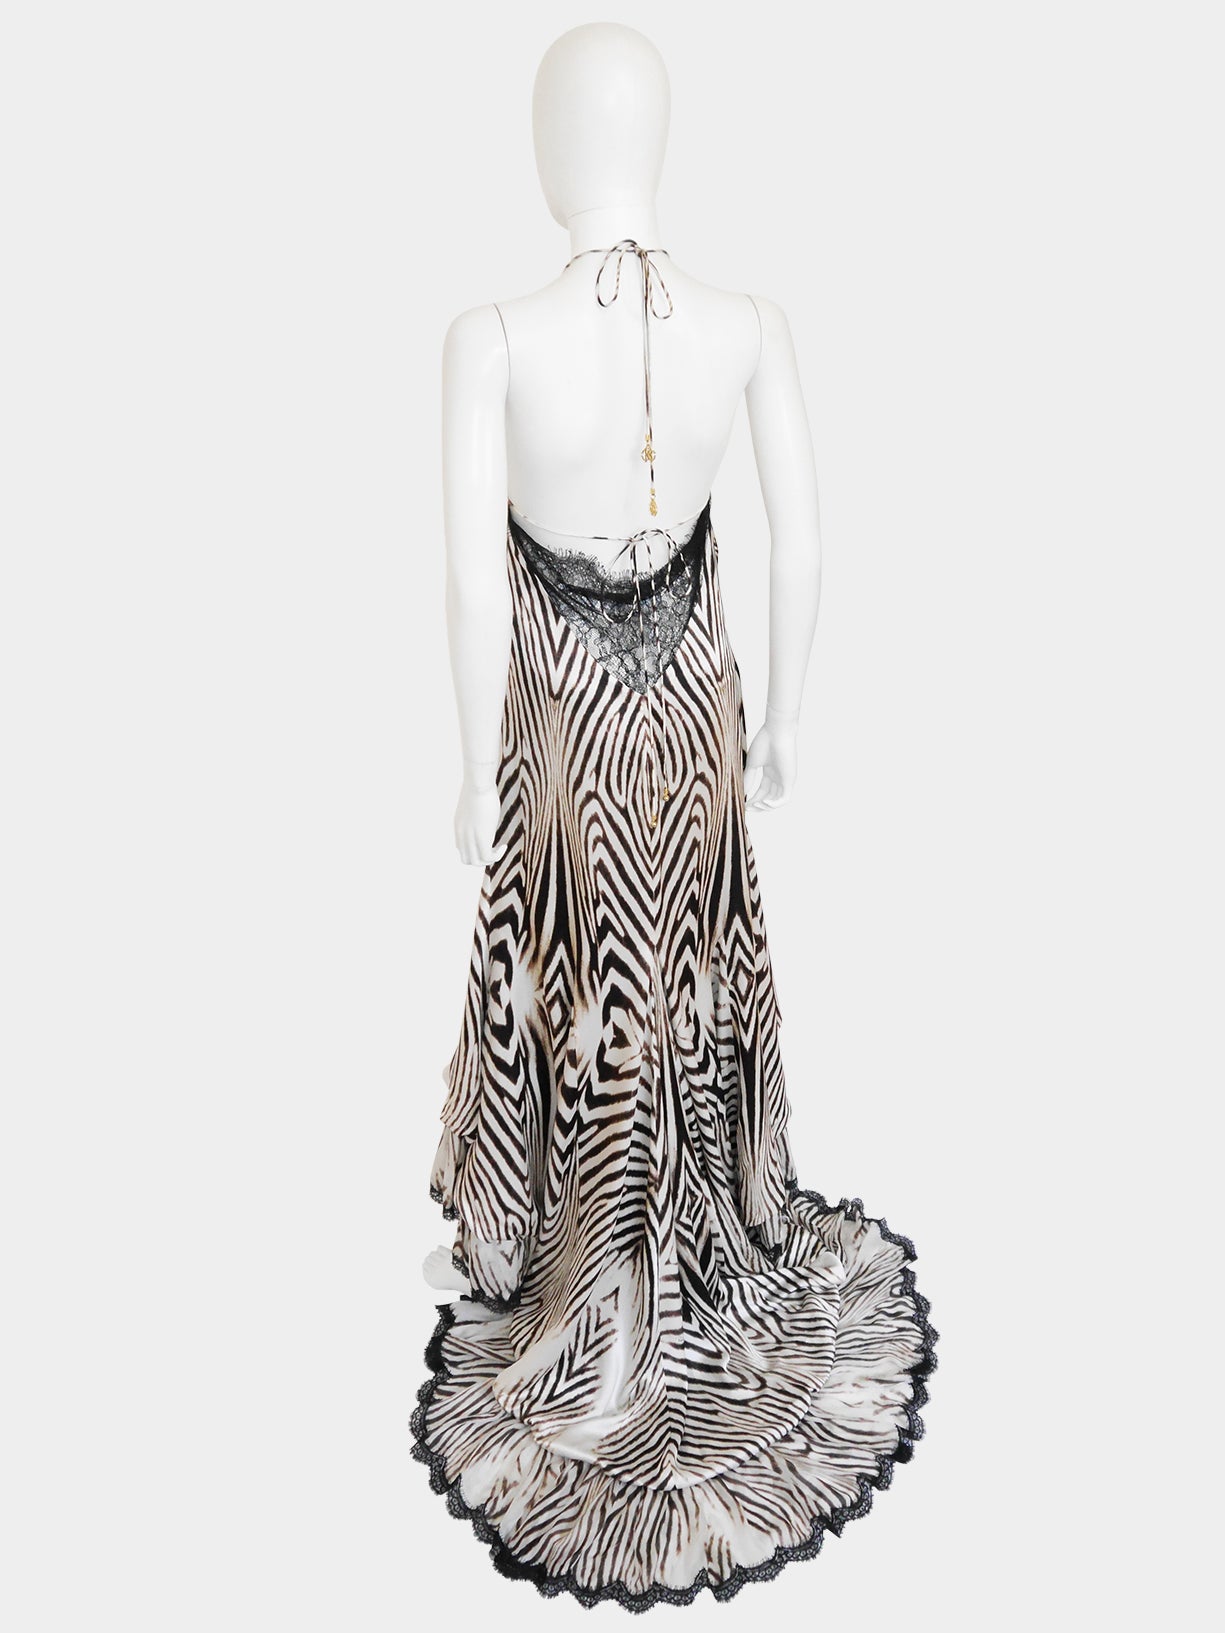 ROBERTO CAVALLI 2000s Vintage Backless Animal Print Silk Lace Evening Gown